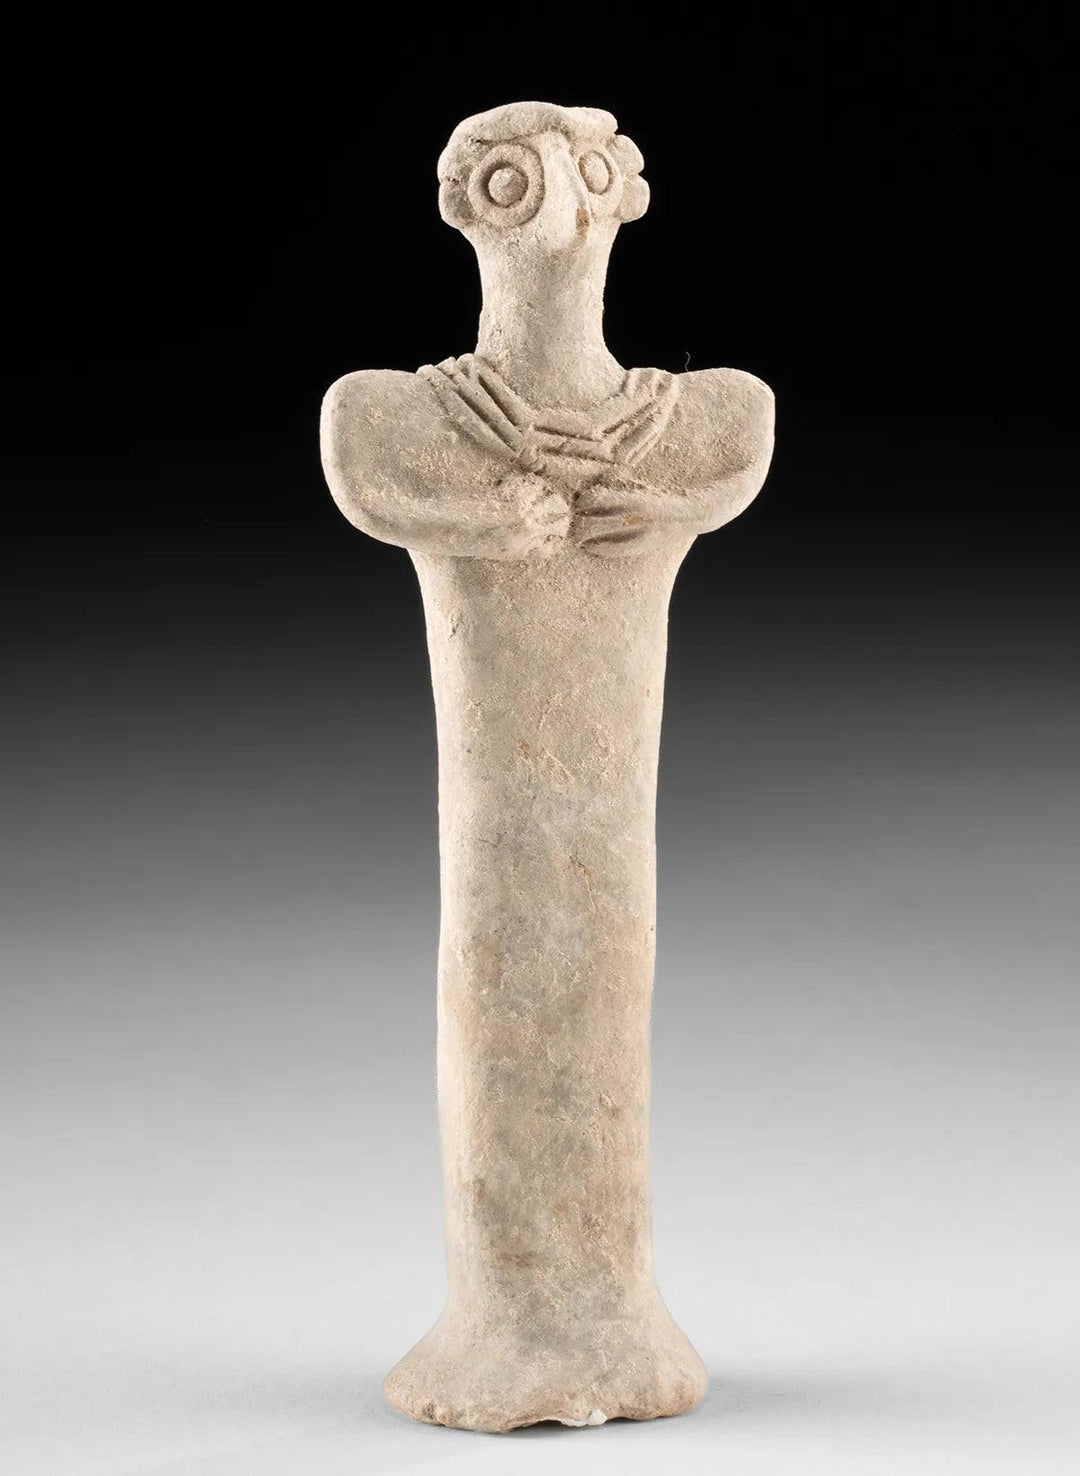 Syro-Hittite Pottery Goddess Statue - 3rd Millennium BCE | Over 4000 Years Old